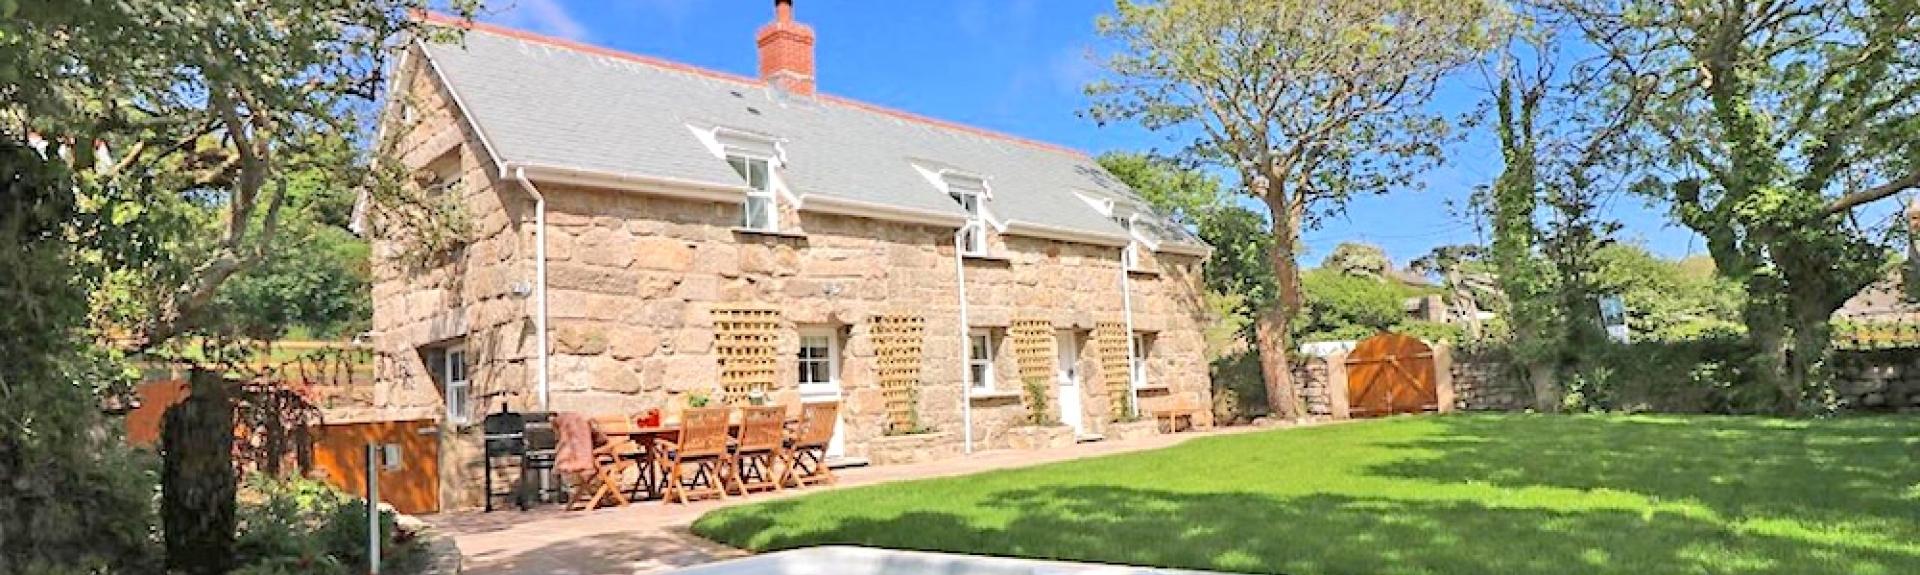 A large Cornish cottage overlooks a tree-lined lawn lawn with a hot tub.